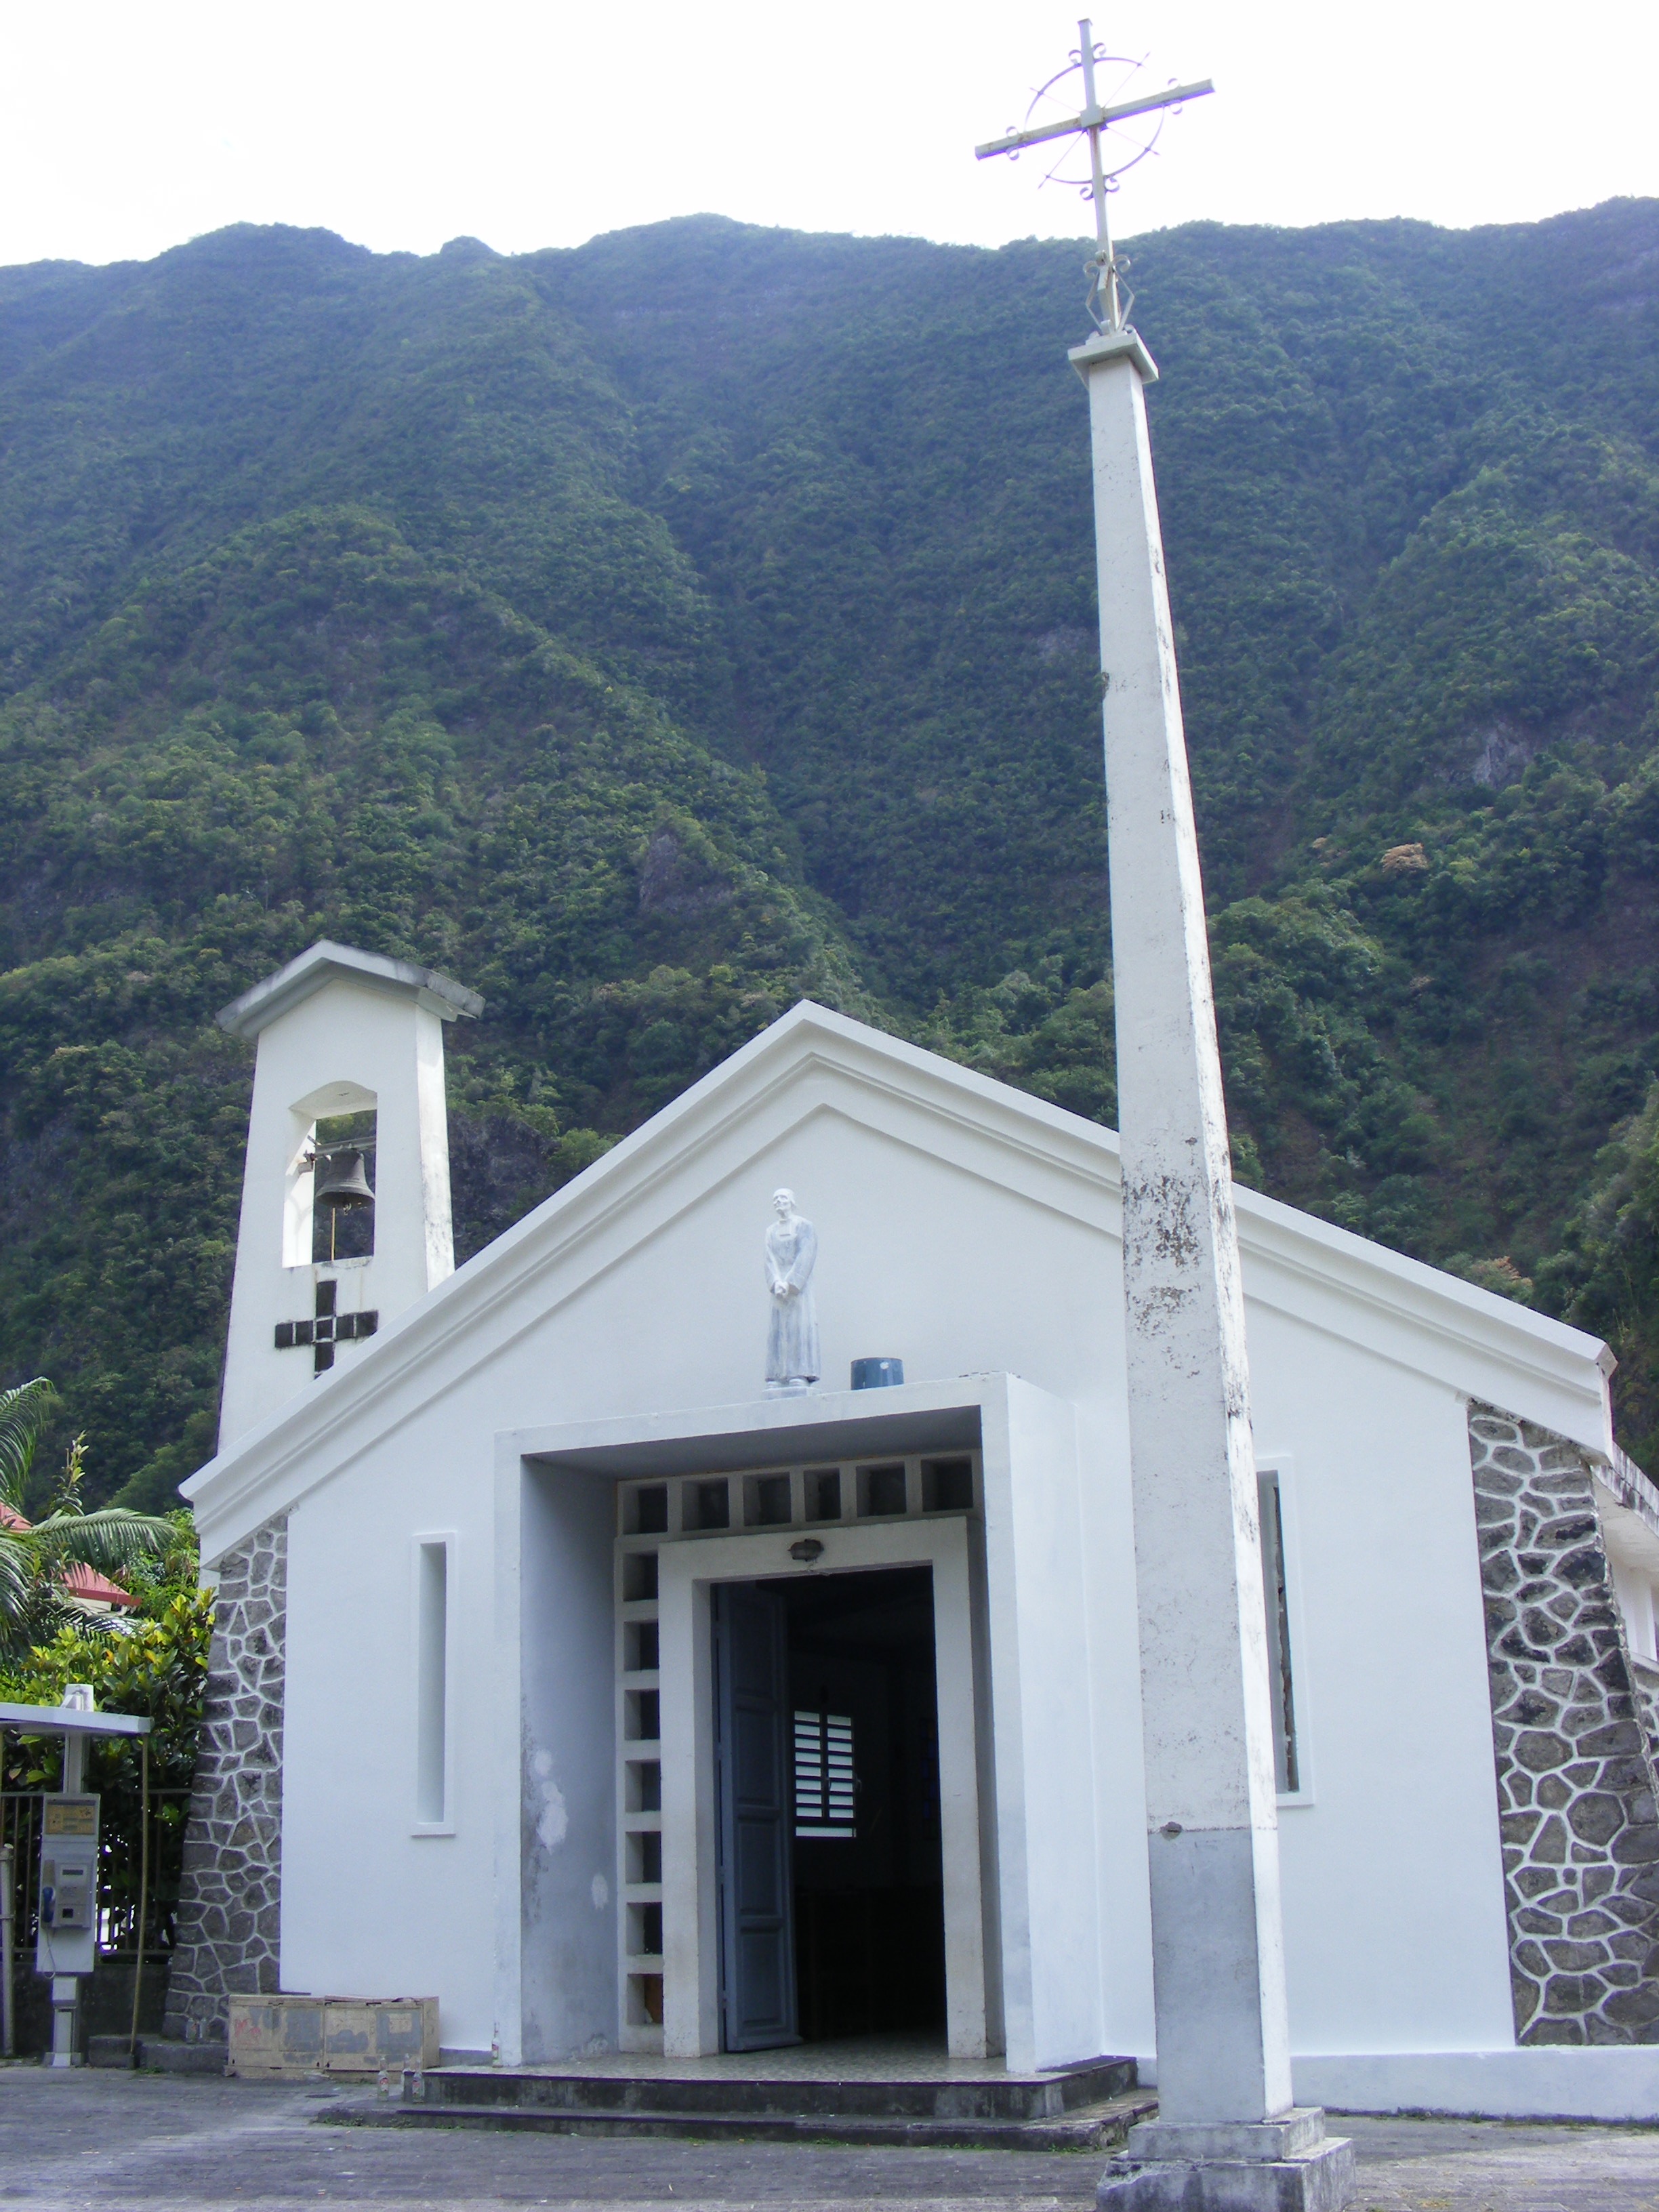 A small church in the Reunion mountains.